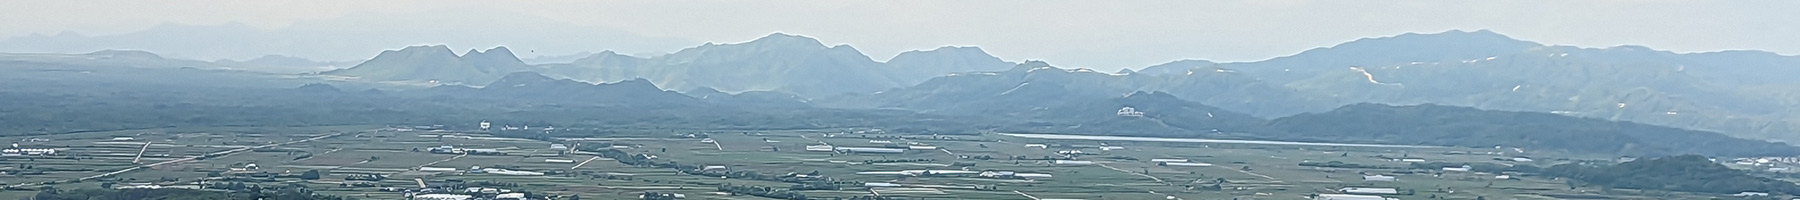 mountains in North Korea